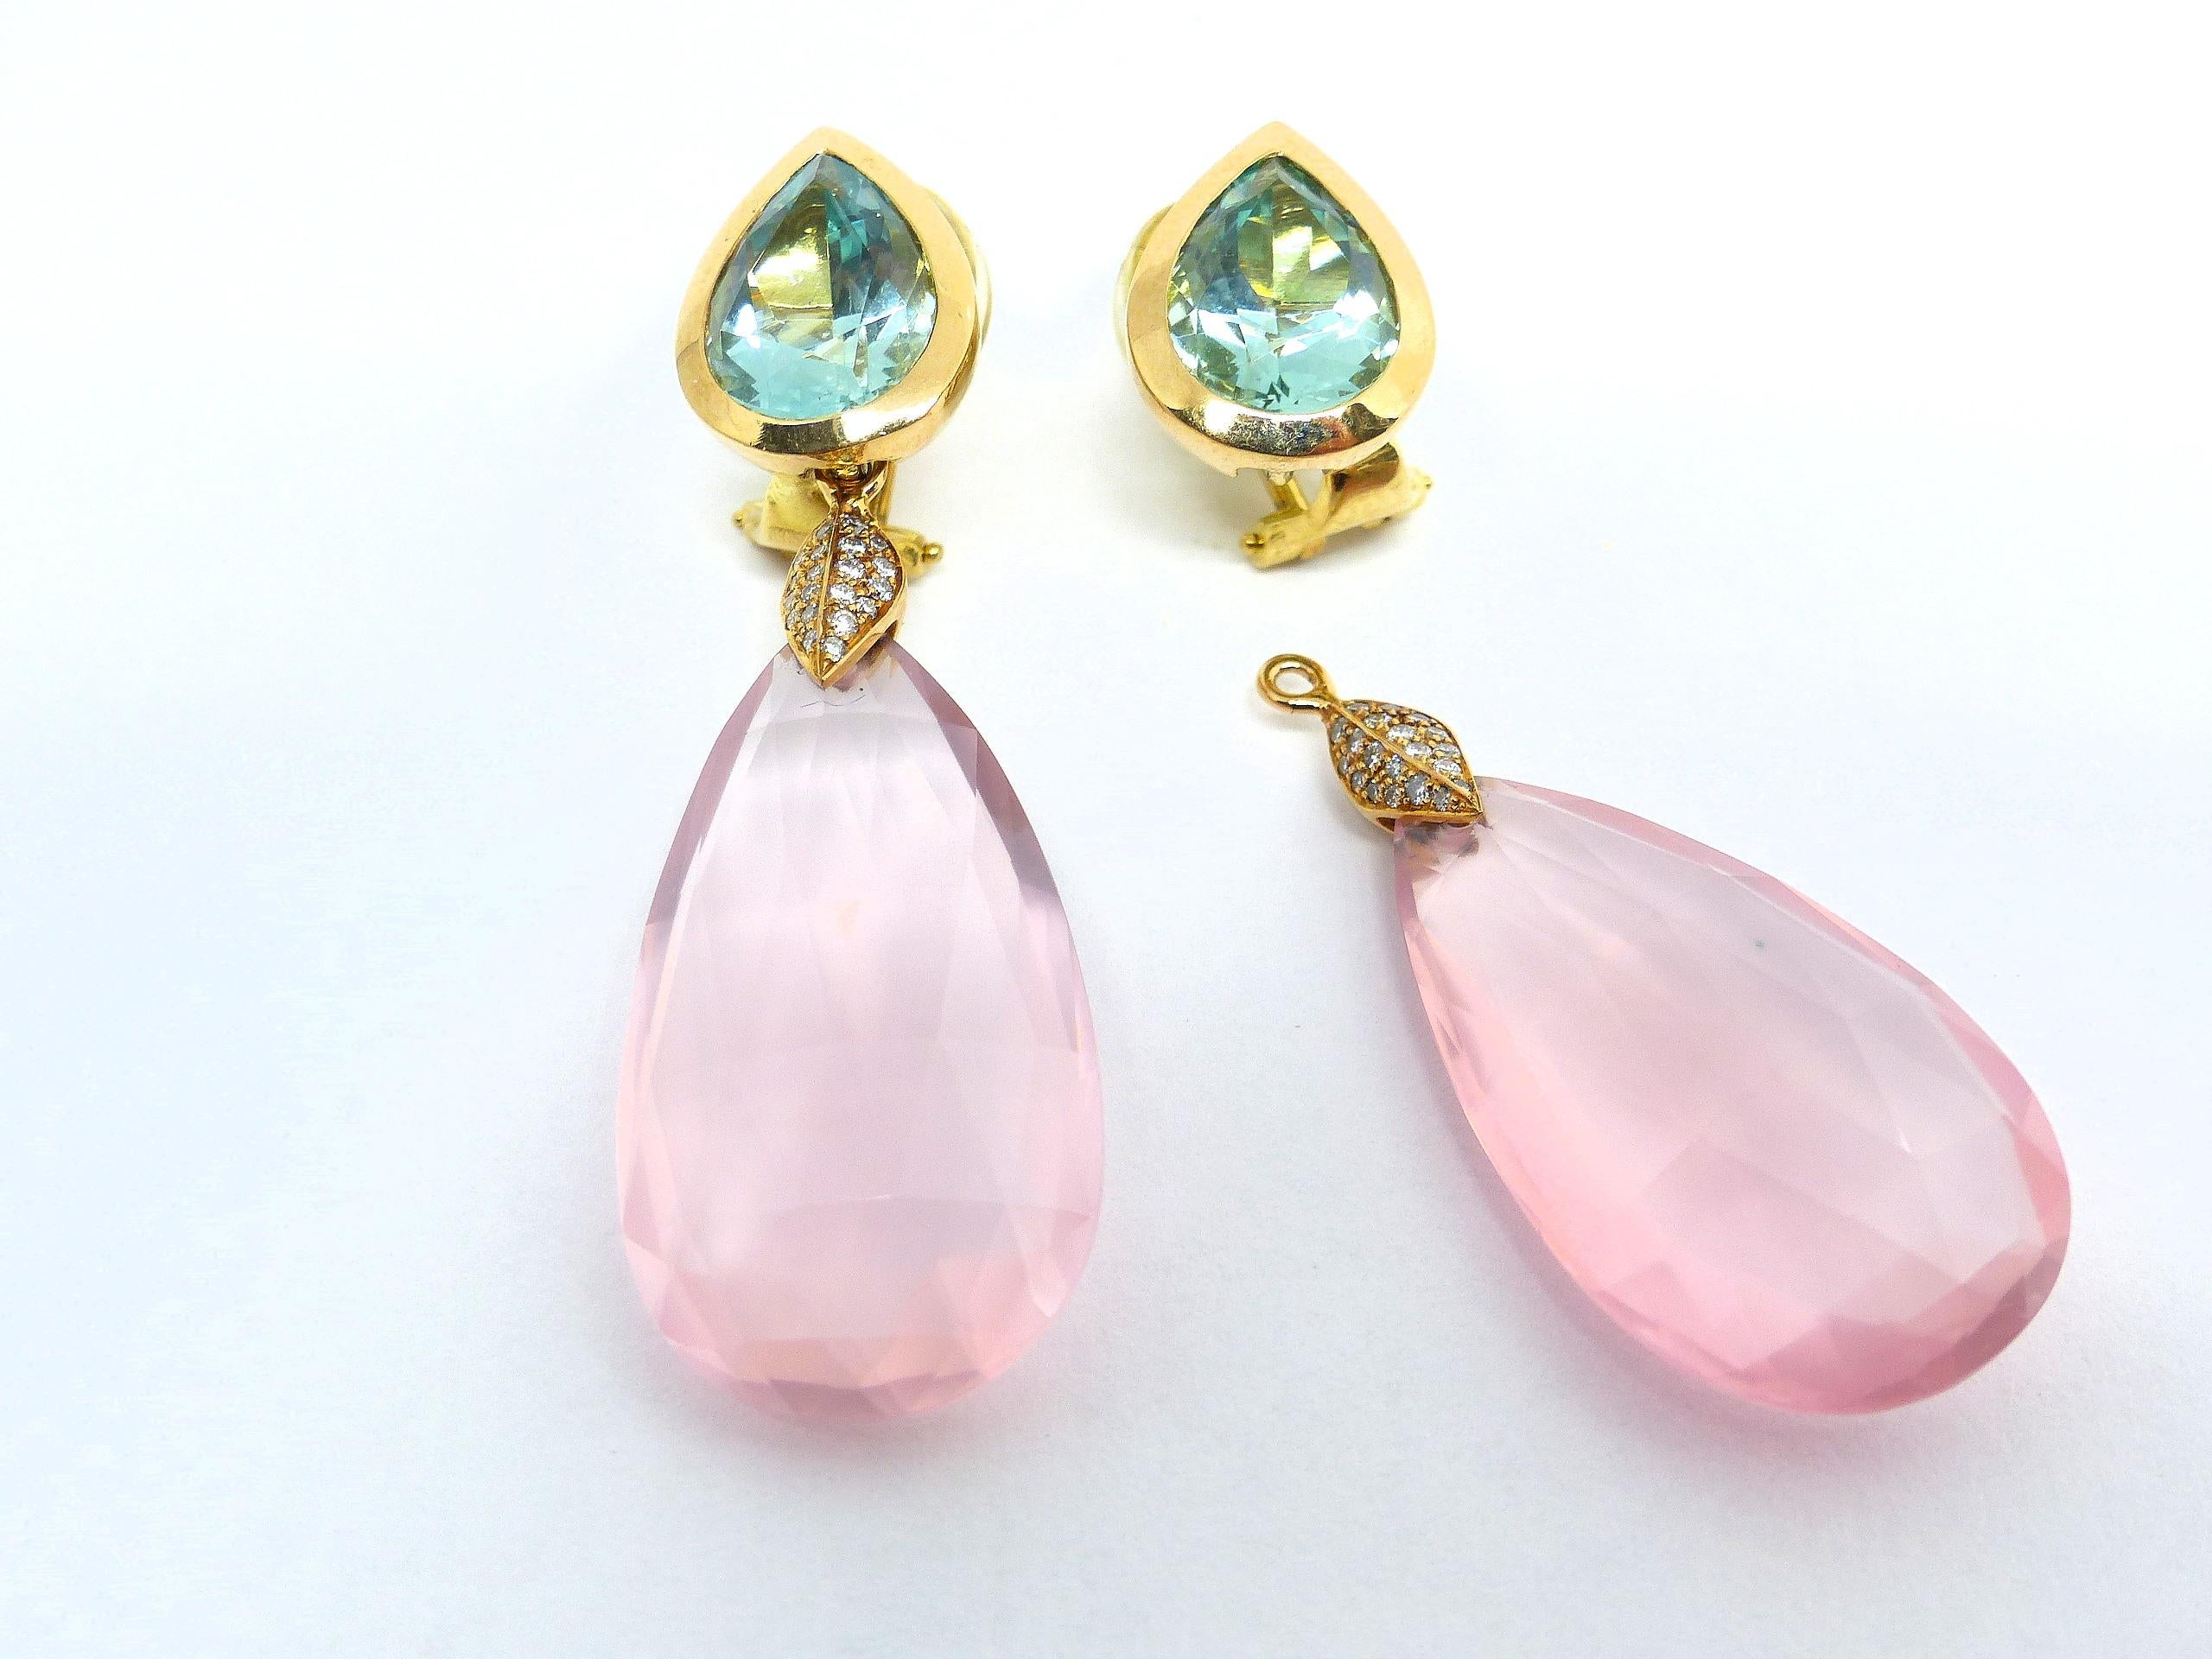 Contemporary Earrings in Rose Gold 2 green Berylls and 2 Rosequarz Briolets and Diamonds. For Sale